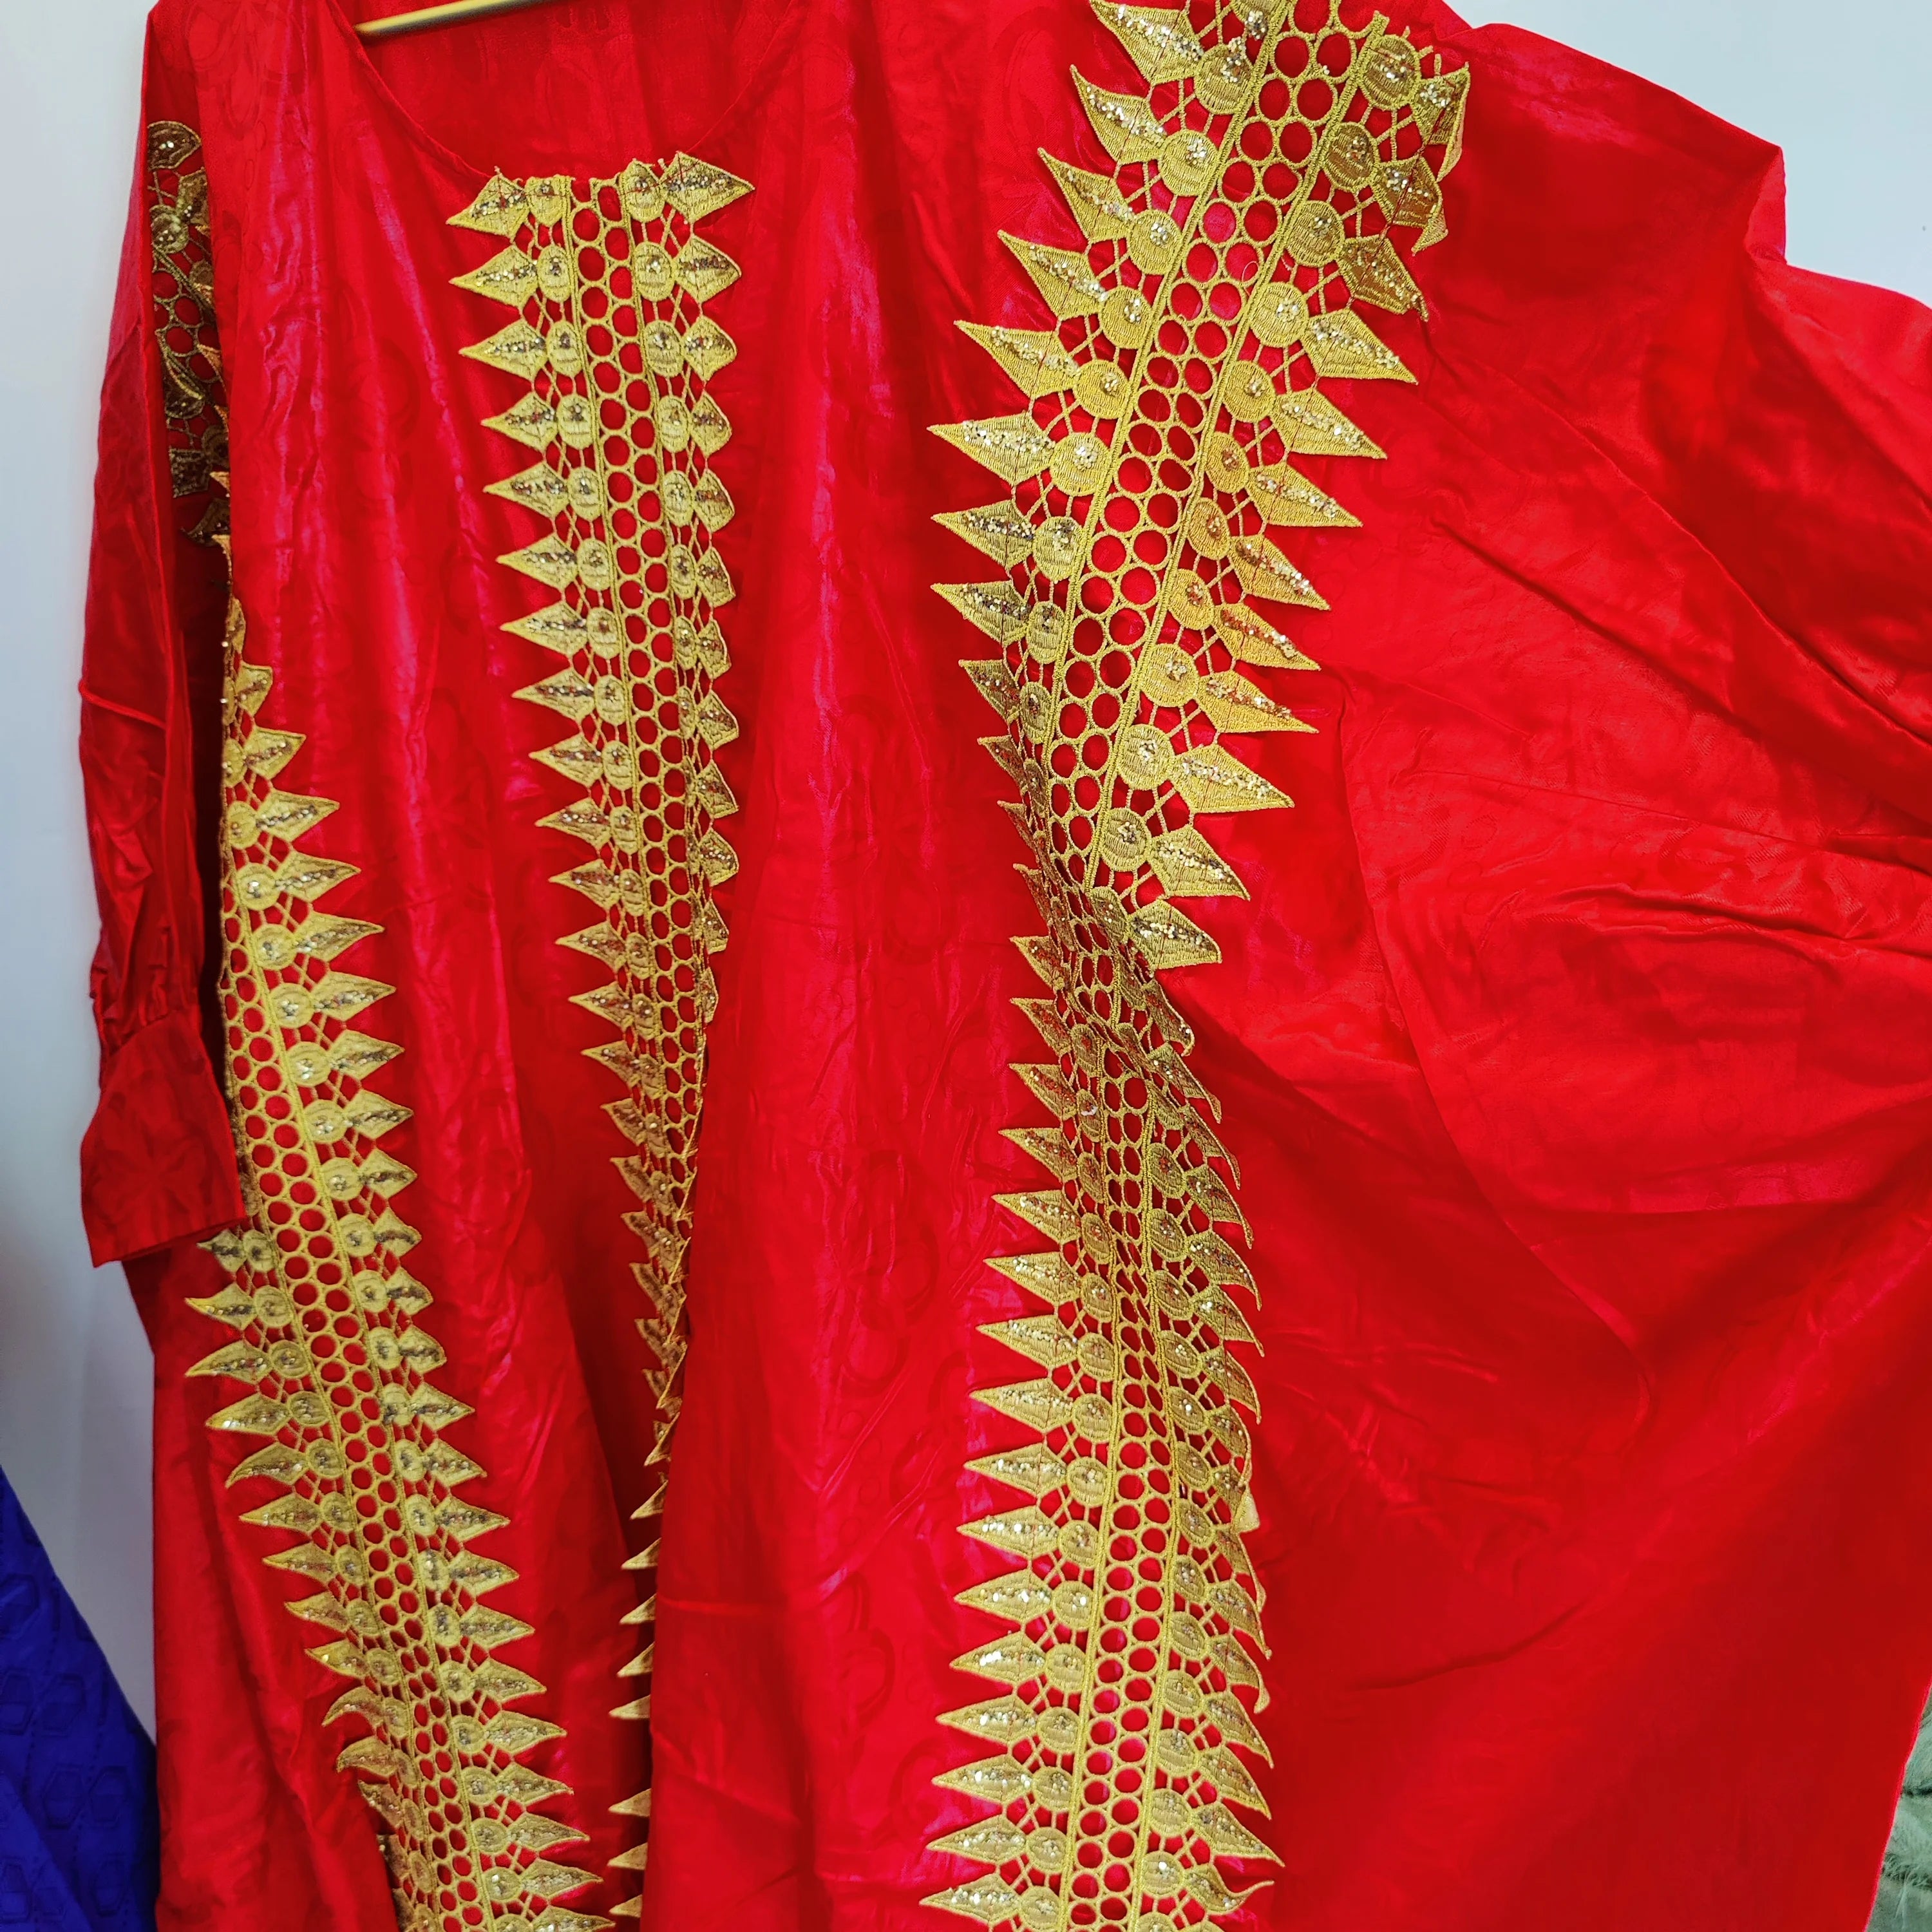 Exquisite African Red Boubou Bazin Riche: Gold Dust Embroidered Wedding Bride Dress - Flexi Africa - Flexi Africa offers Free Delivery Worldwide - Vibrant African traditional clothing showcasing bold prints and intricate designs